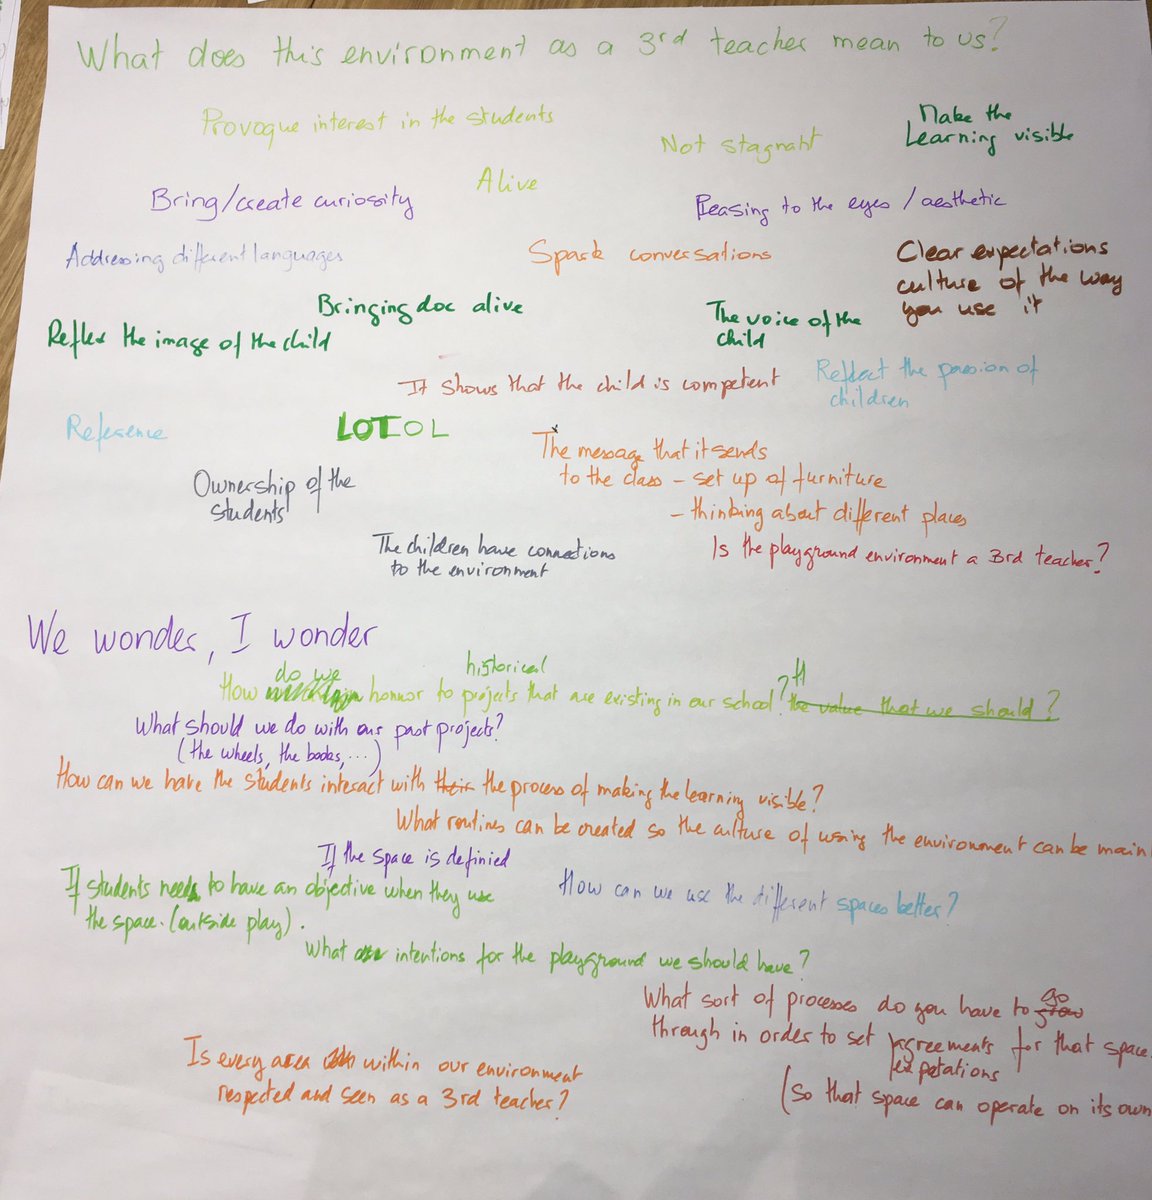 PK team reflects, What does the environment as a 3rd teacher mean to us? #reggioinspired #100languages #collaboration #wbaiseslearns #LOTOL